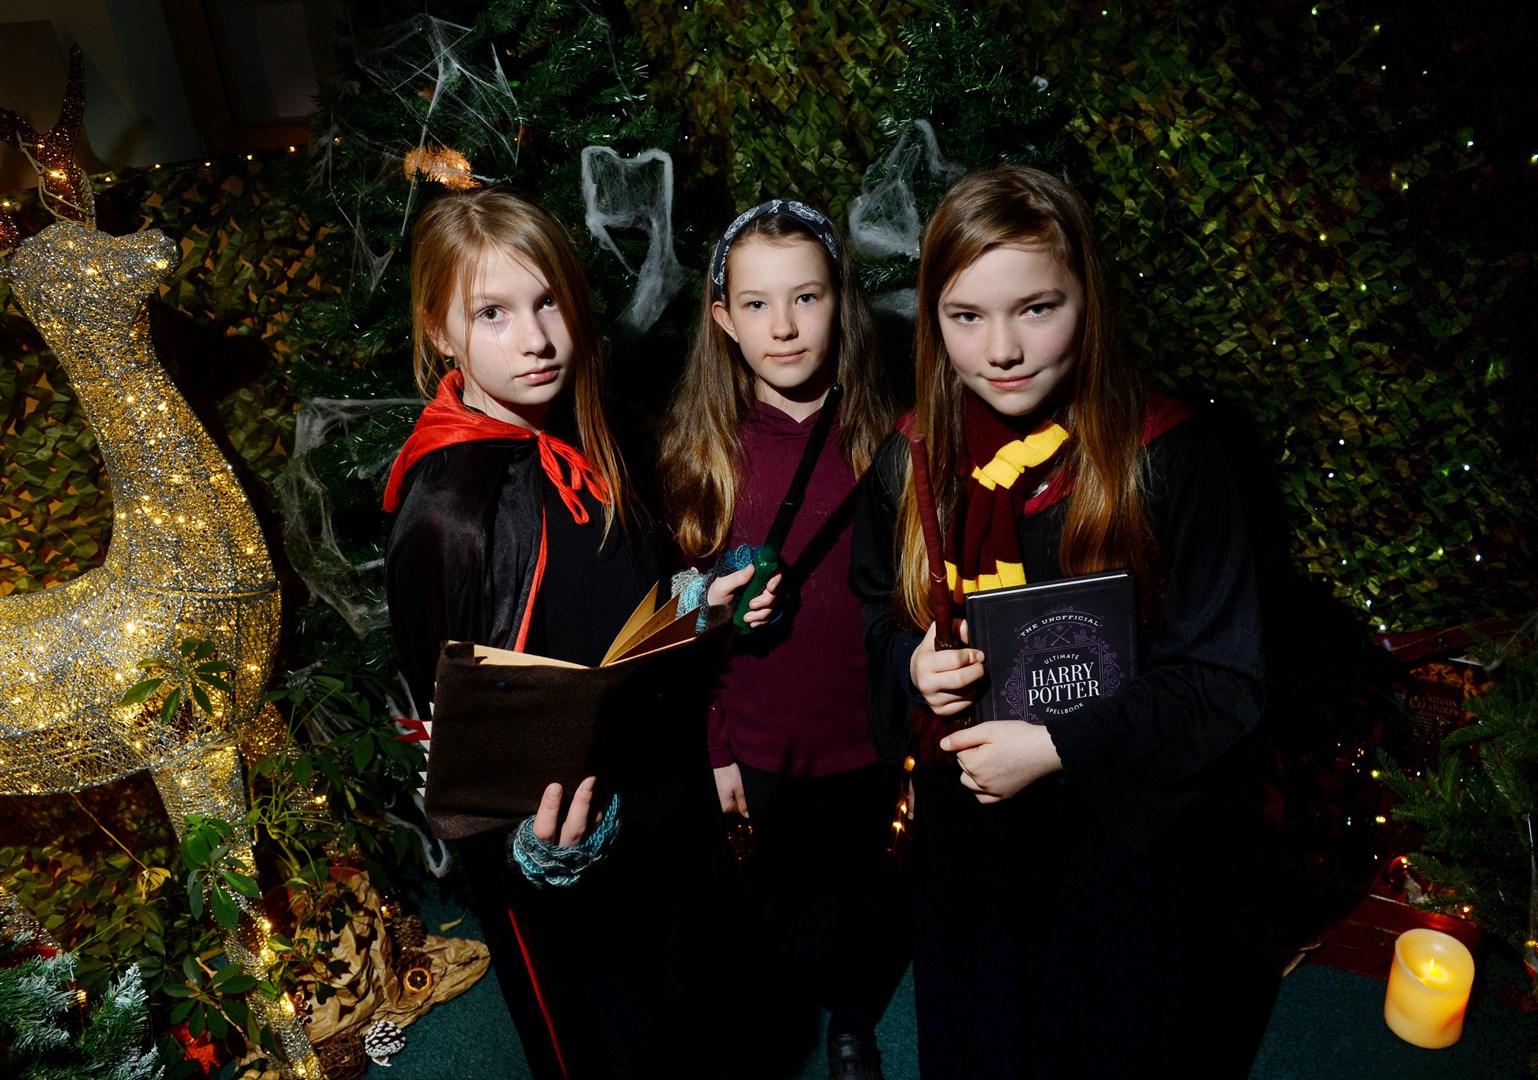 In the forbidden forest are Eloise Robertson, Jessica Smith and Elin Robertson. Picture Gary Anthony